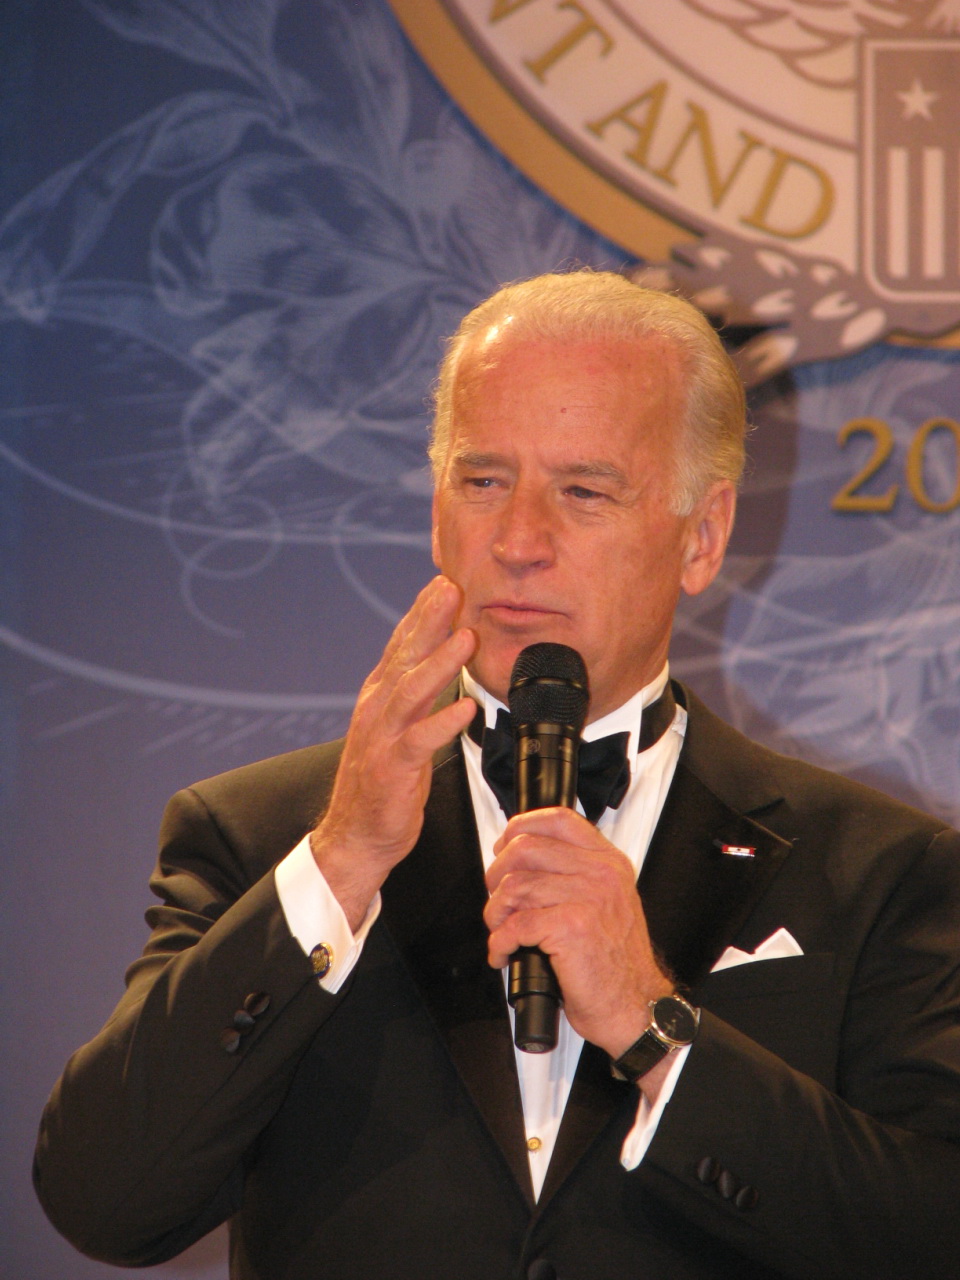 a man in a tuxedo talking into a microphone